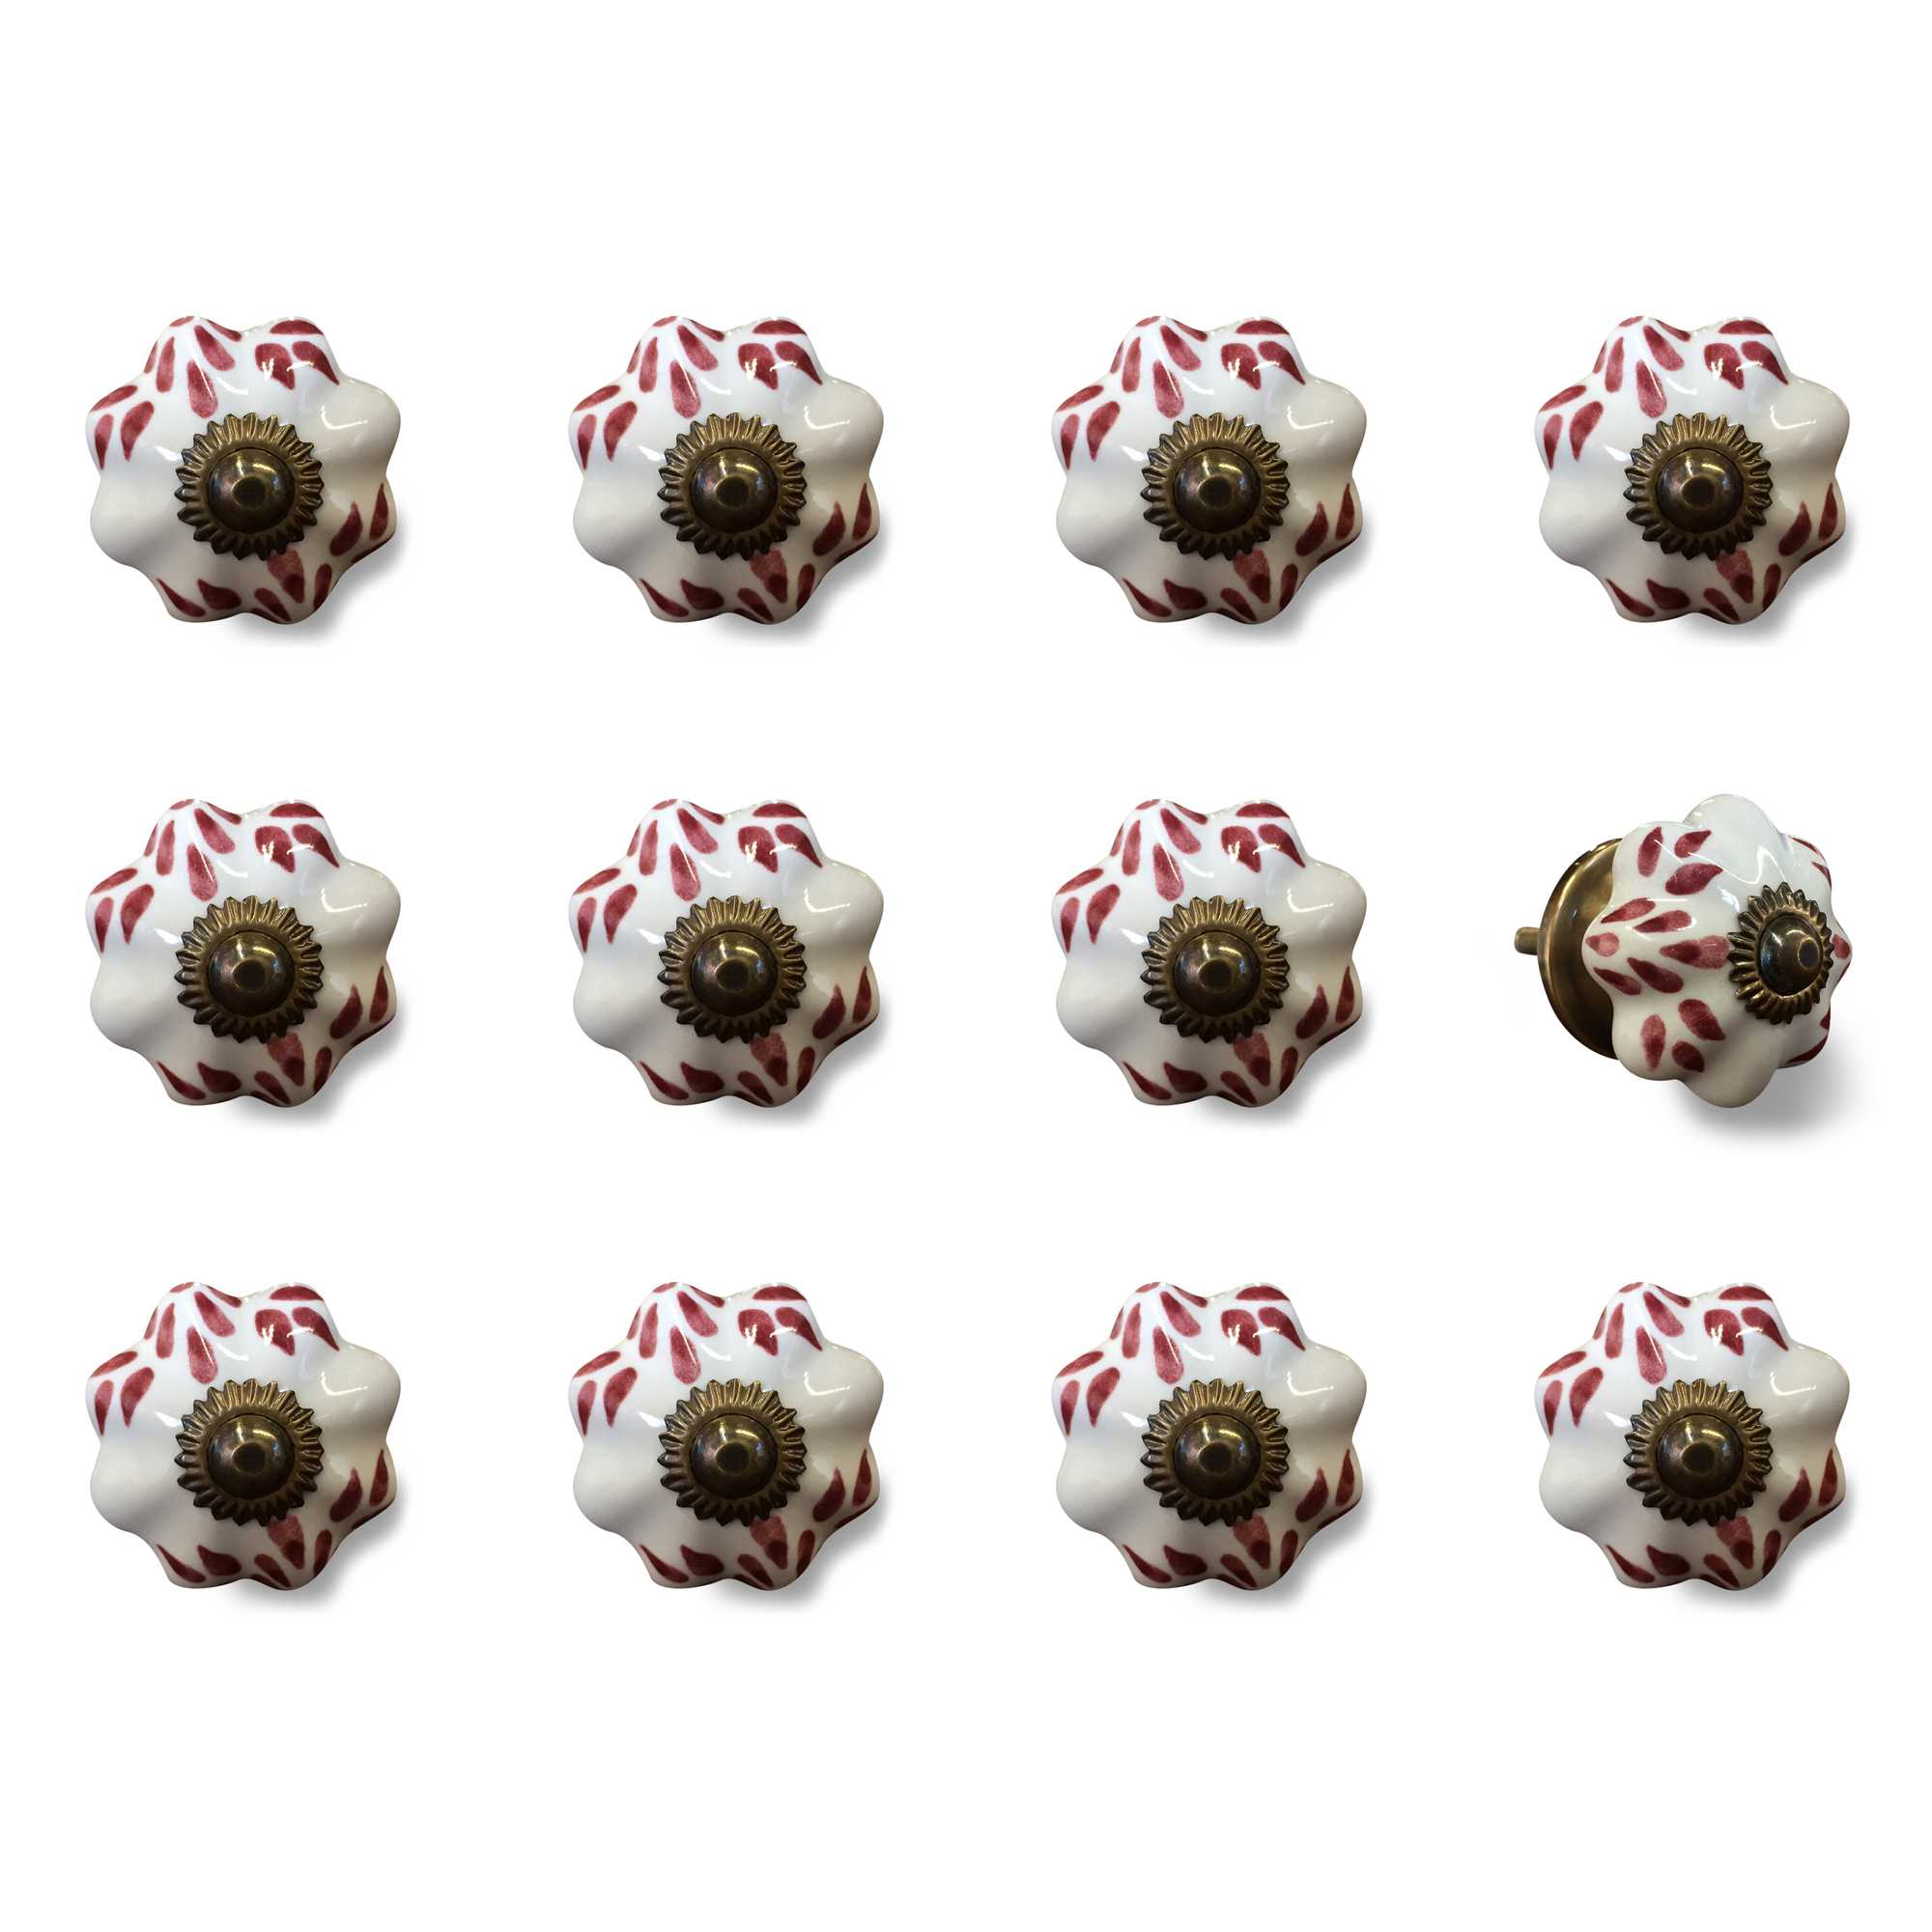 1.5" x 1.5" x 1.5" White, Burgundy and Copper- Knobs 12-Pack